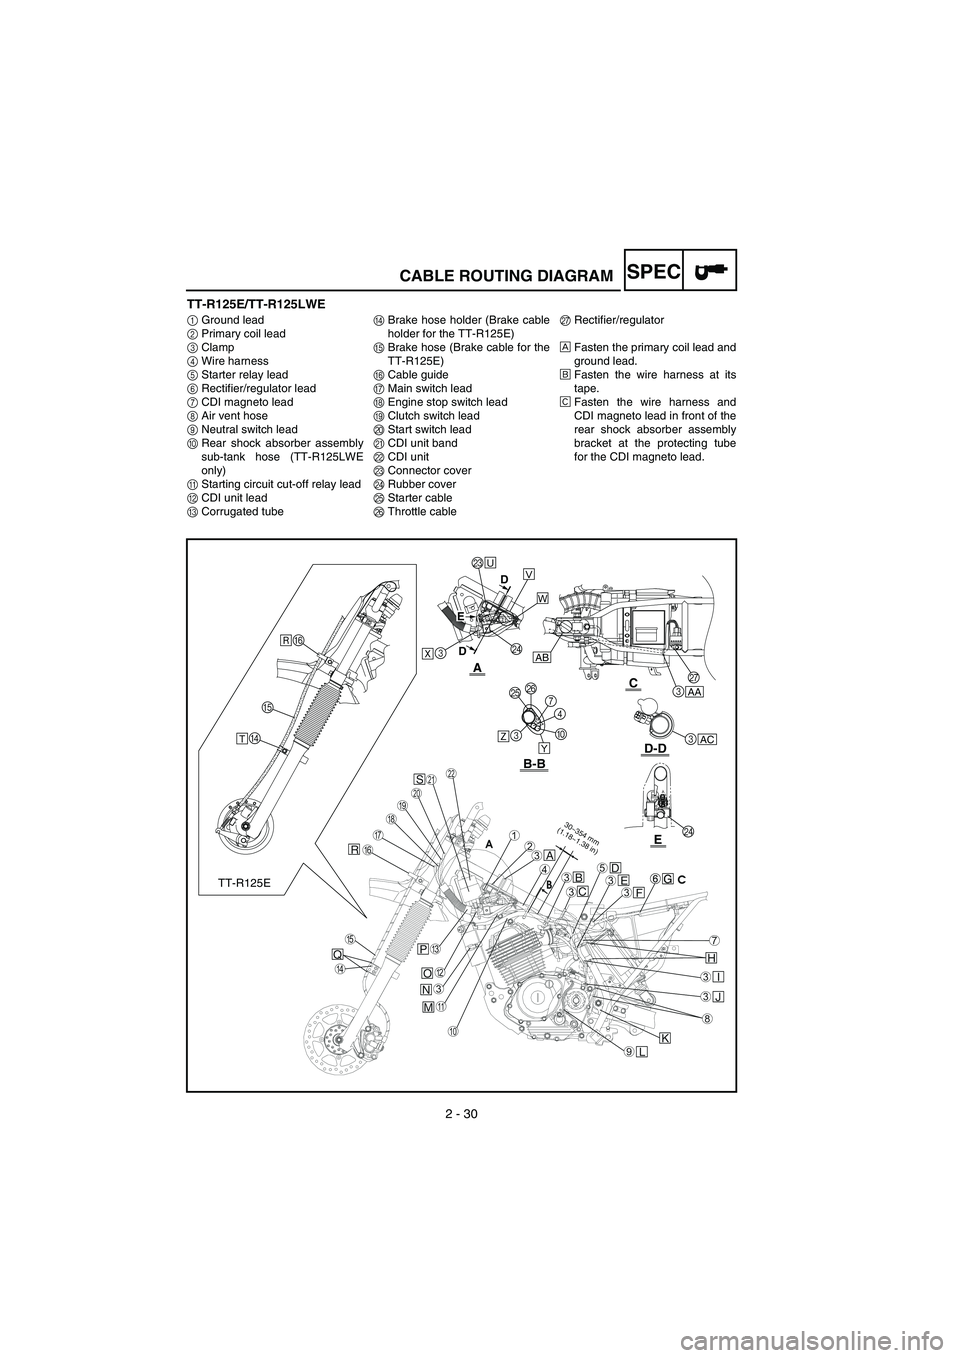 YAMAHA TTR125 2006  Notices Demploi (in French) 6 - B - V
2 - 30
SPECCABLE ROUTING DIAGRAM
TT-R125E/TT-R125LWE
1Ground lead
2 Primary coil lead
3 Clamp
4 Wire harness
5 Starter relay lead
6 Rectifier/regulator lead
7 CDI magneto lead
8 Air vent hos